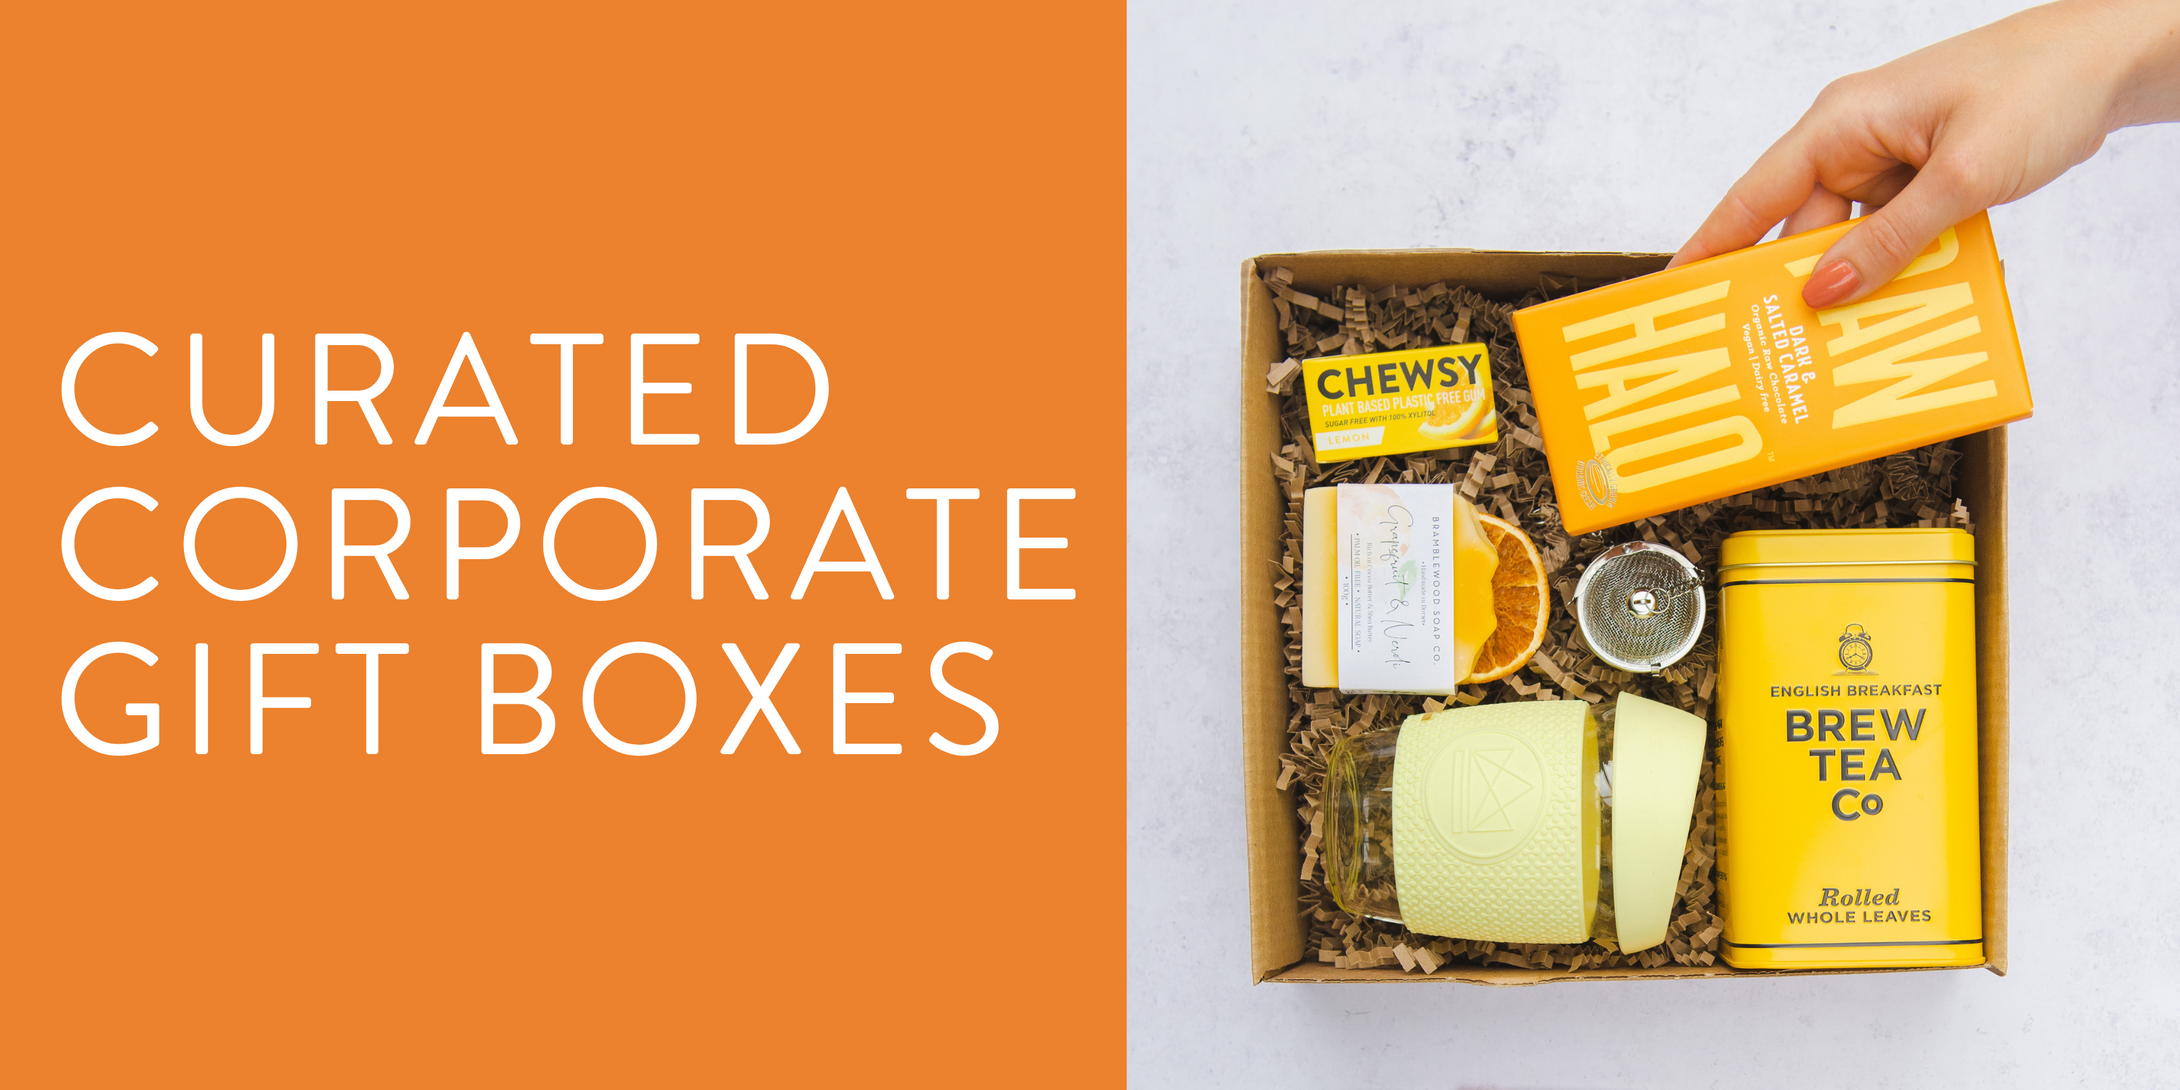 Curated corporate gift boxes